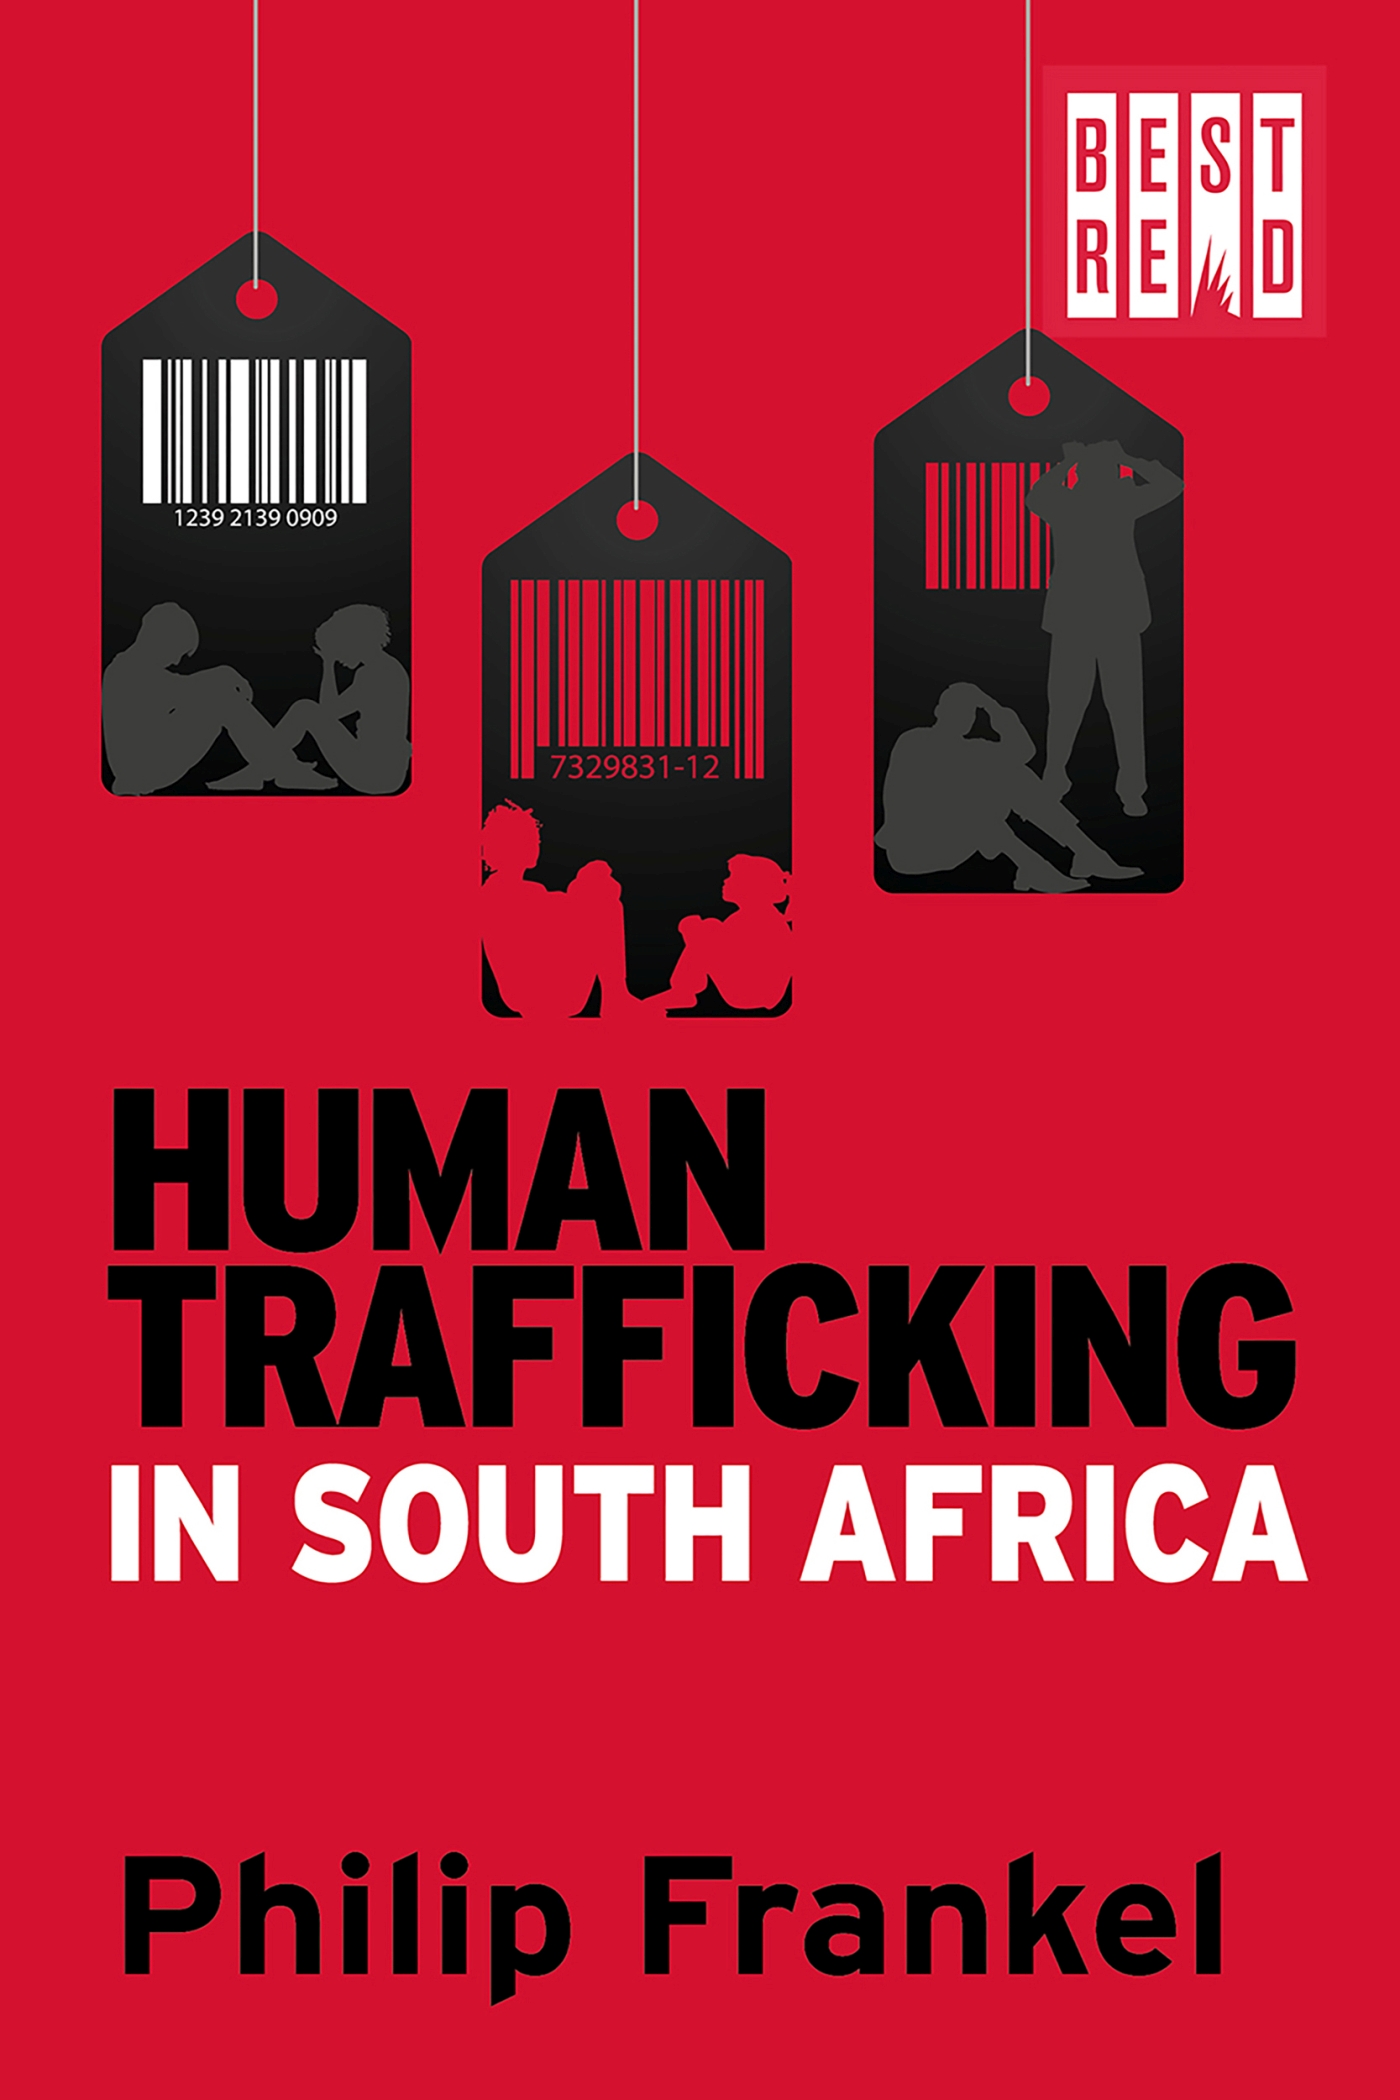 World Day Against Trafficking In Persons Prof Philip Frankel Speaks To Enca Hsrc 7110